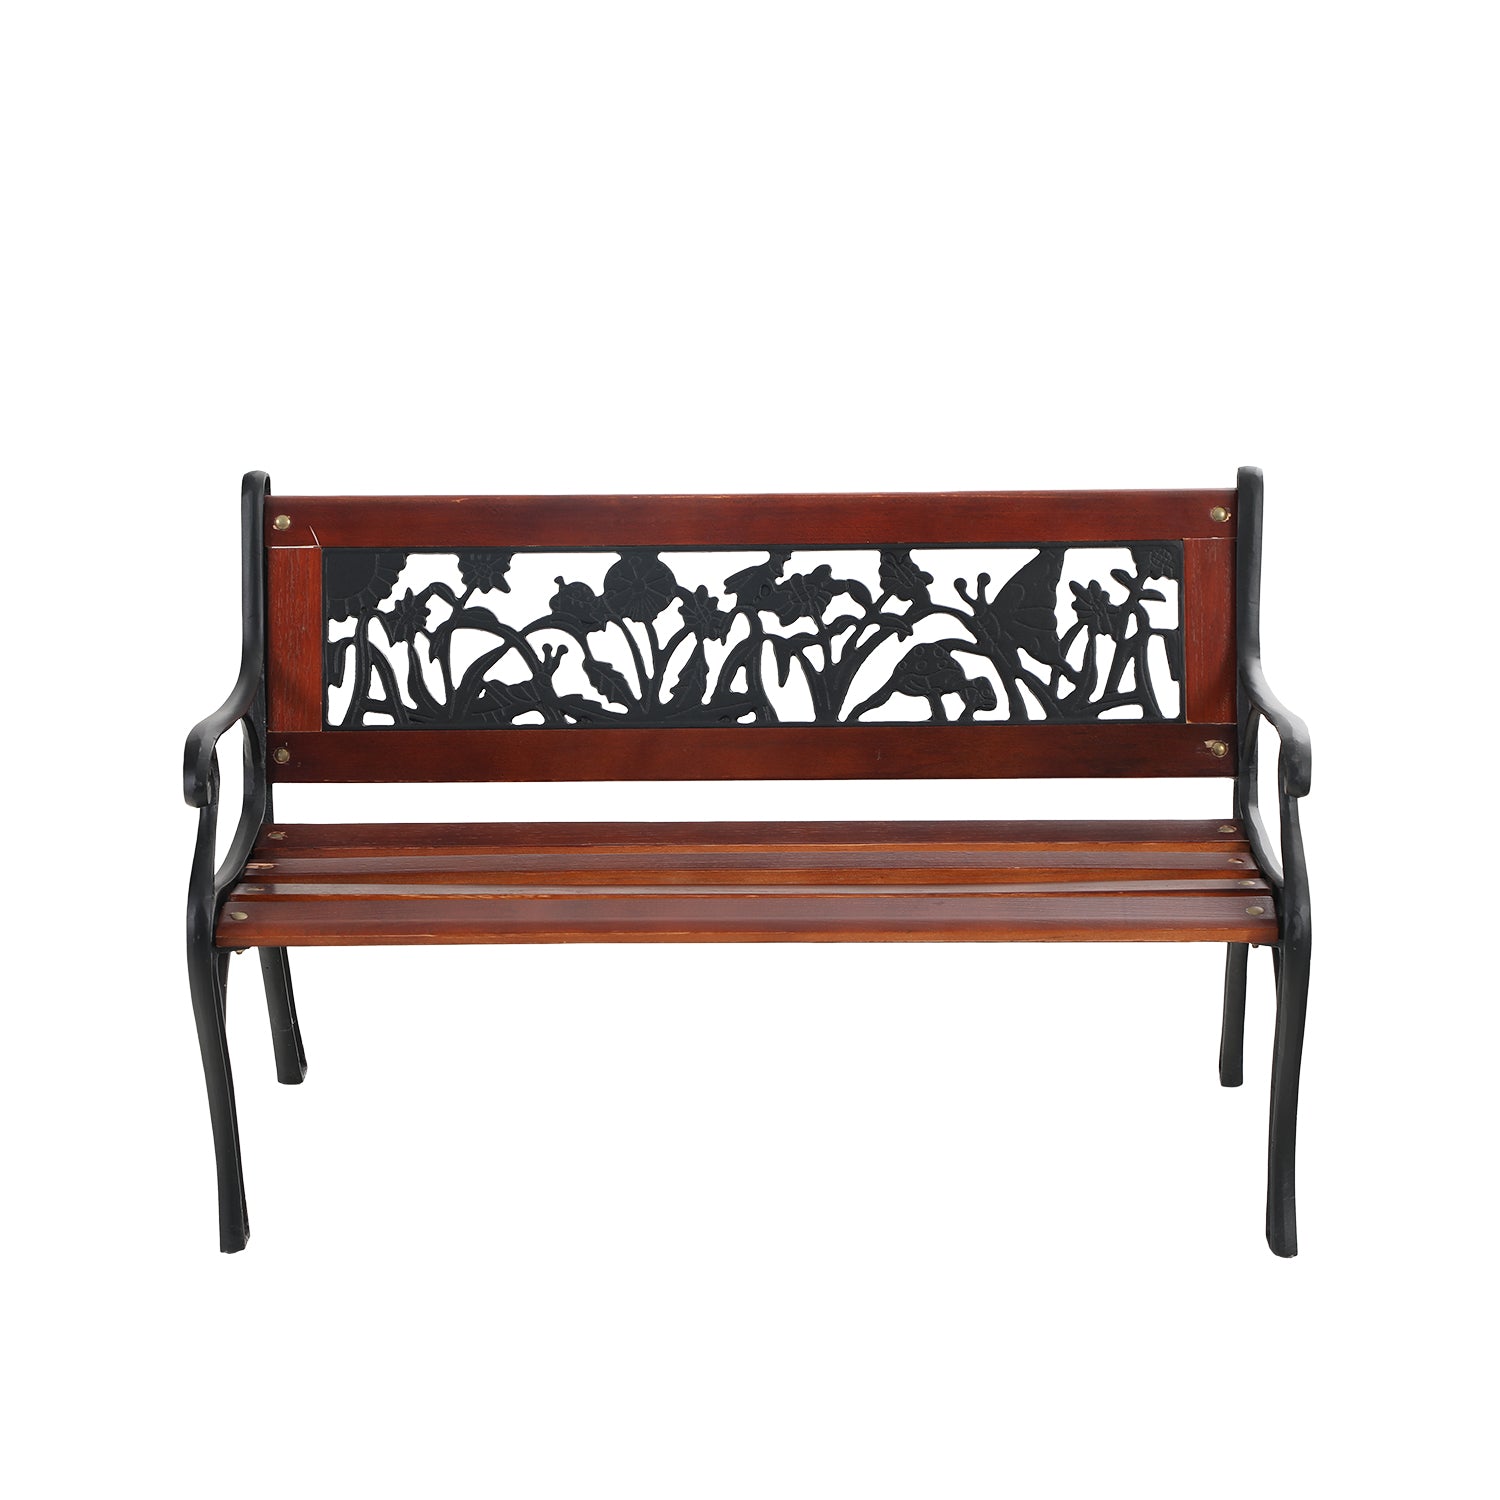 PHI VILLA 33" Outdoor Kids Sized Garden Metal Bench with Wood Seating